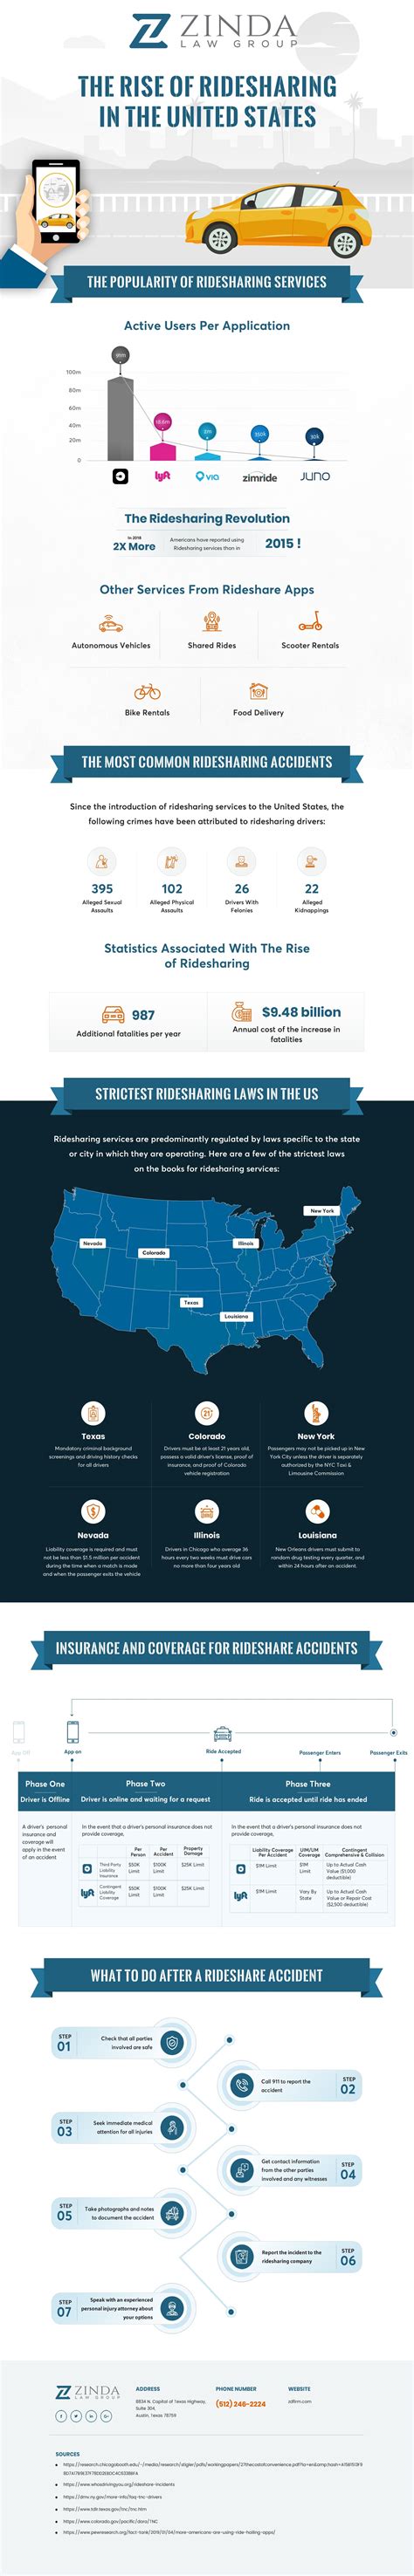 Ridesharing In The United States Zinda Law Group